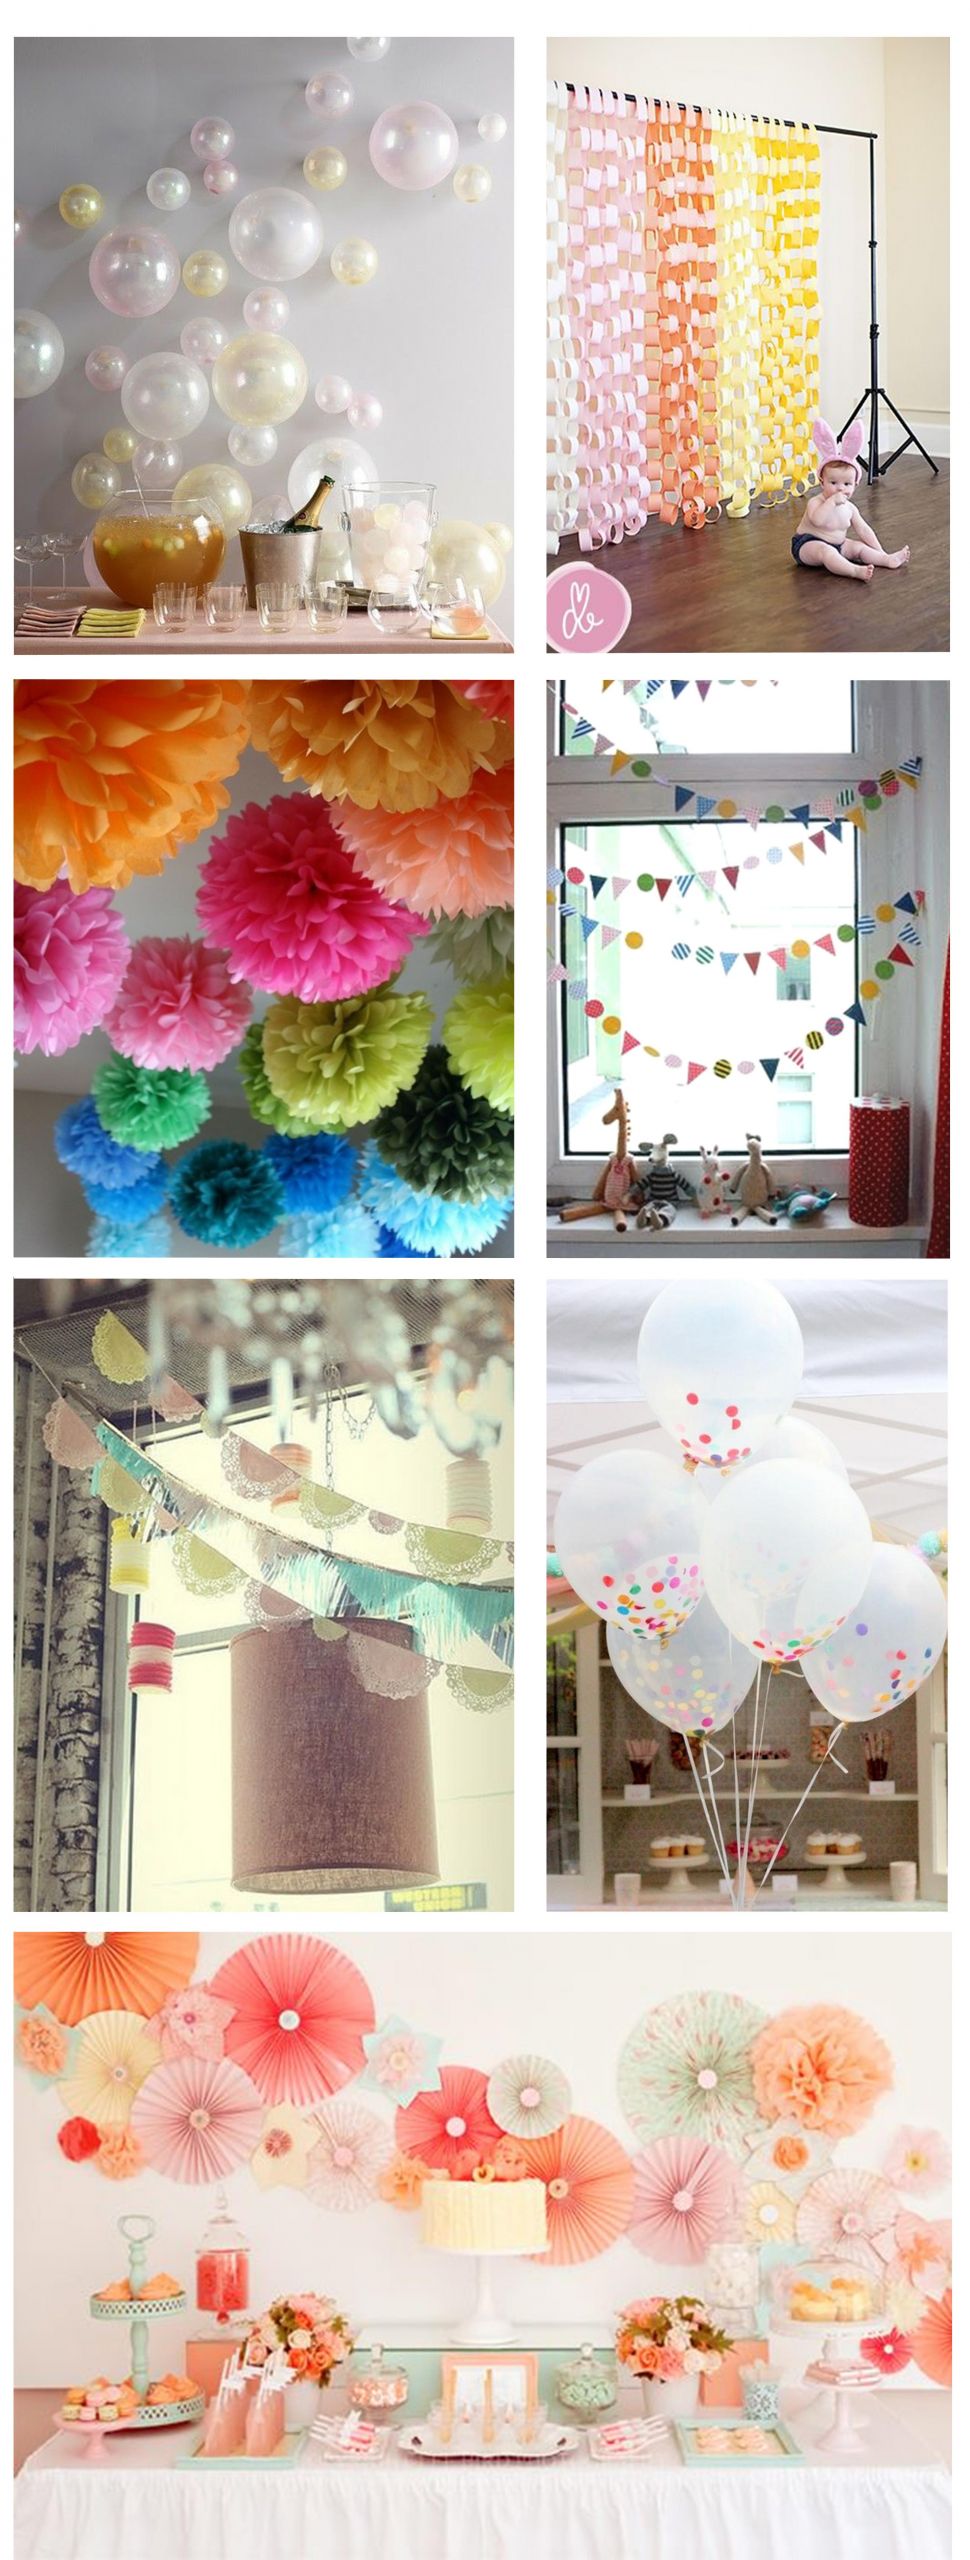 DIY Party Decorations
 Ideas for home made party decorations